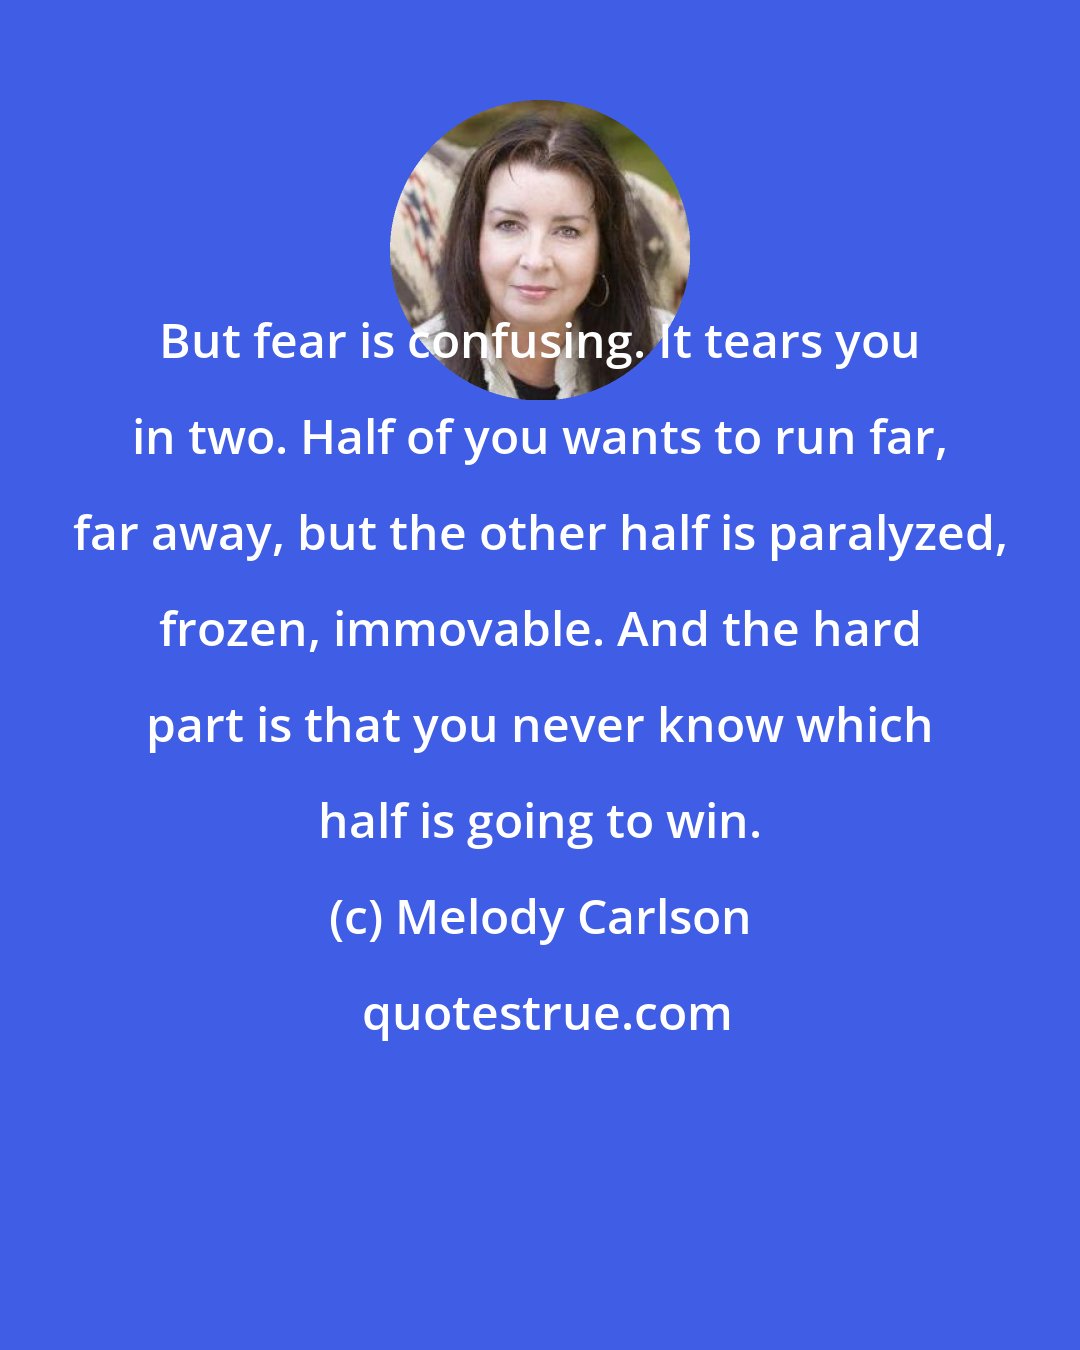 Melody Carlson: But fear is confusing. It tears you in two. Half of you wants to run far, far away, but the other half is paralyzed, frozen, immovable. And the hard part is that you never know which half is going to win.